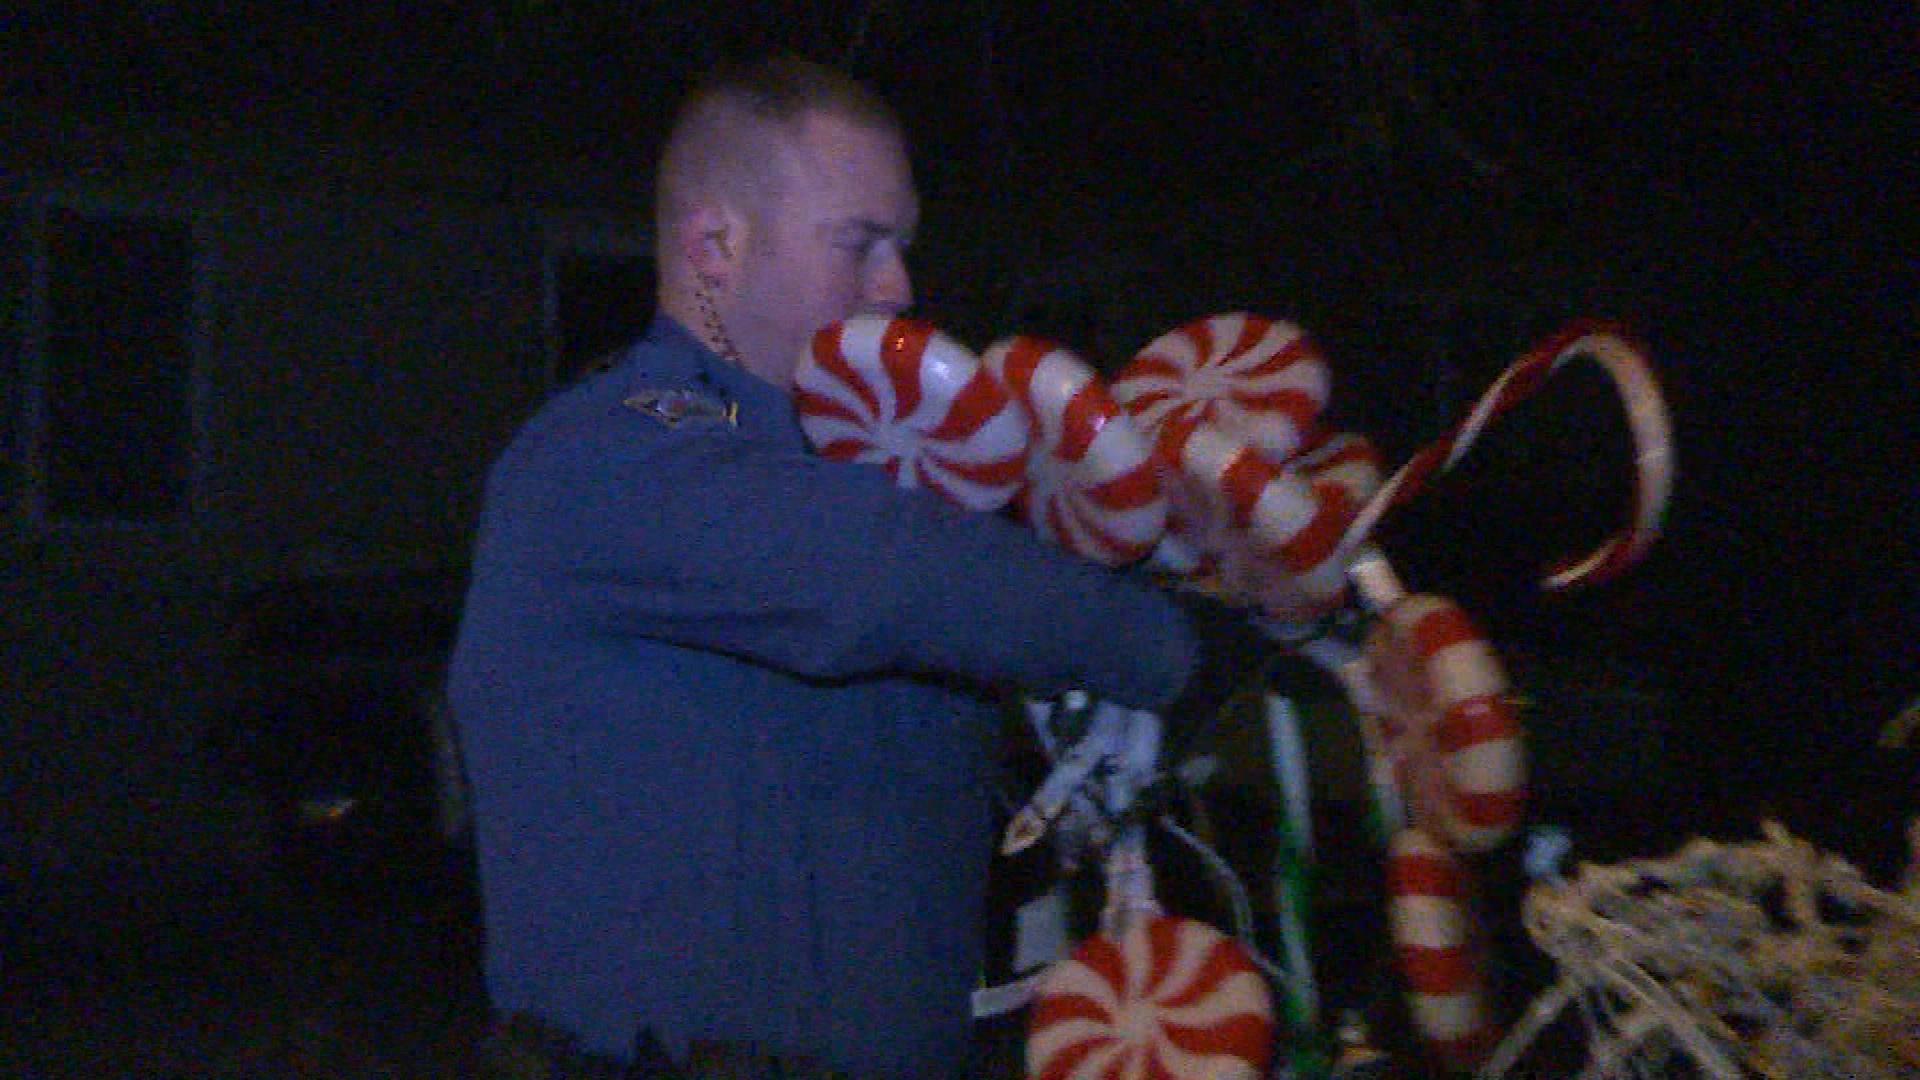 Law enforcement removes some of the decorations. (credit: KKTV)